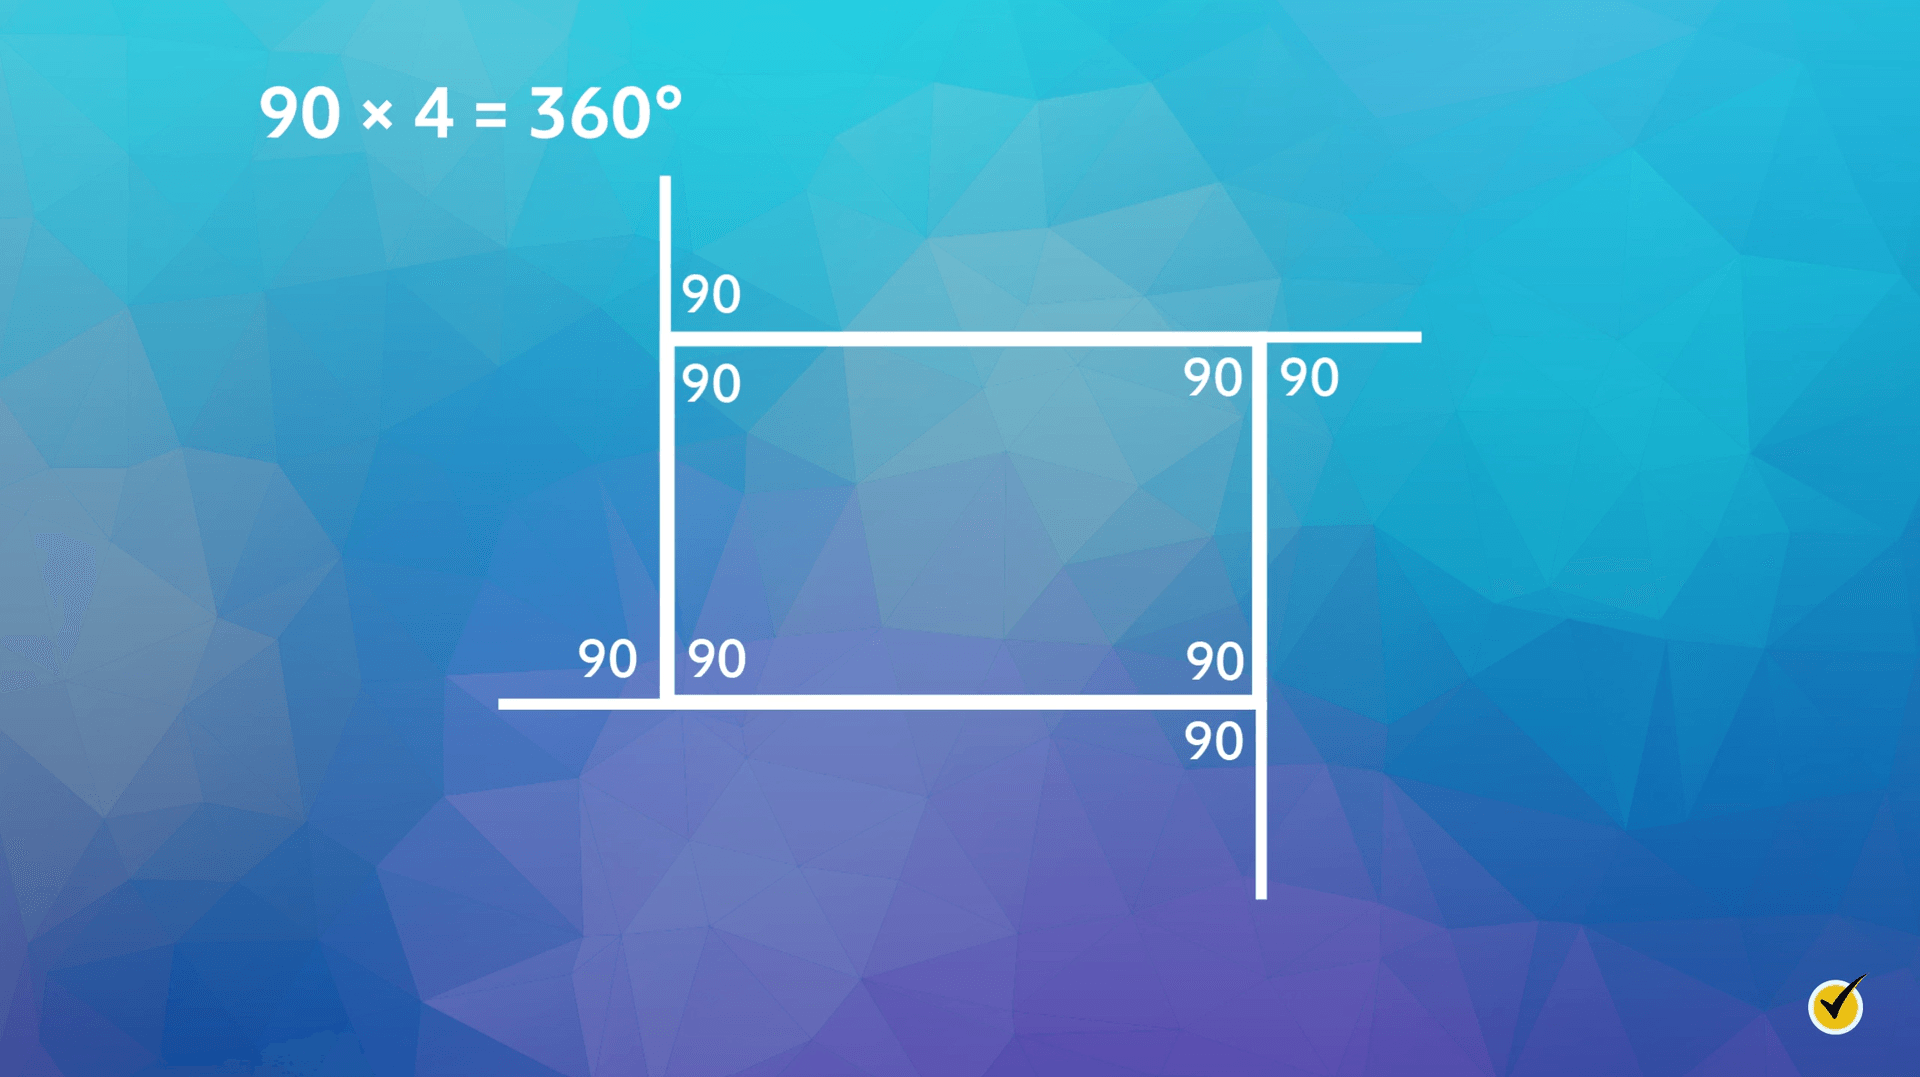 Image of rectangular polygon with angles of 90 degrees, and exterior angles of 90 degrees. 